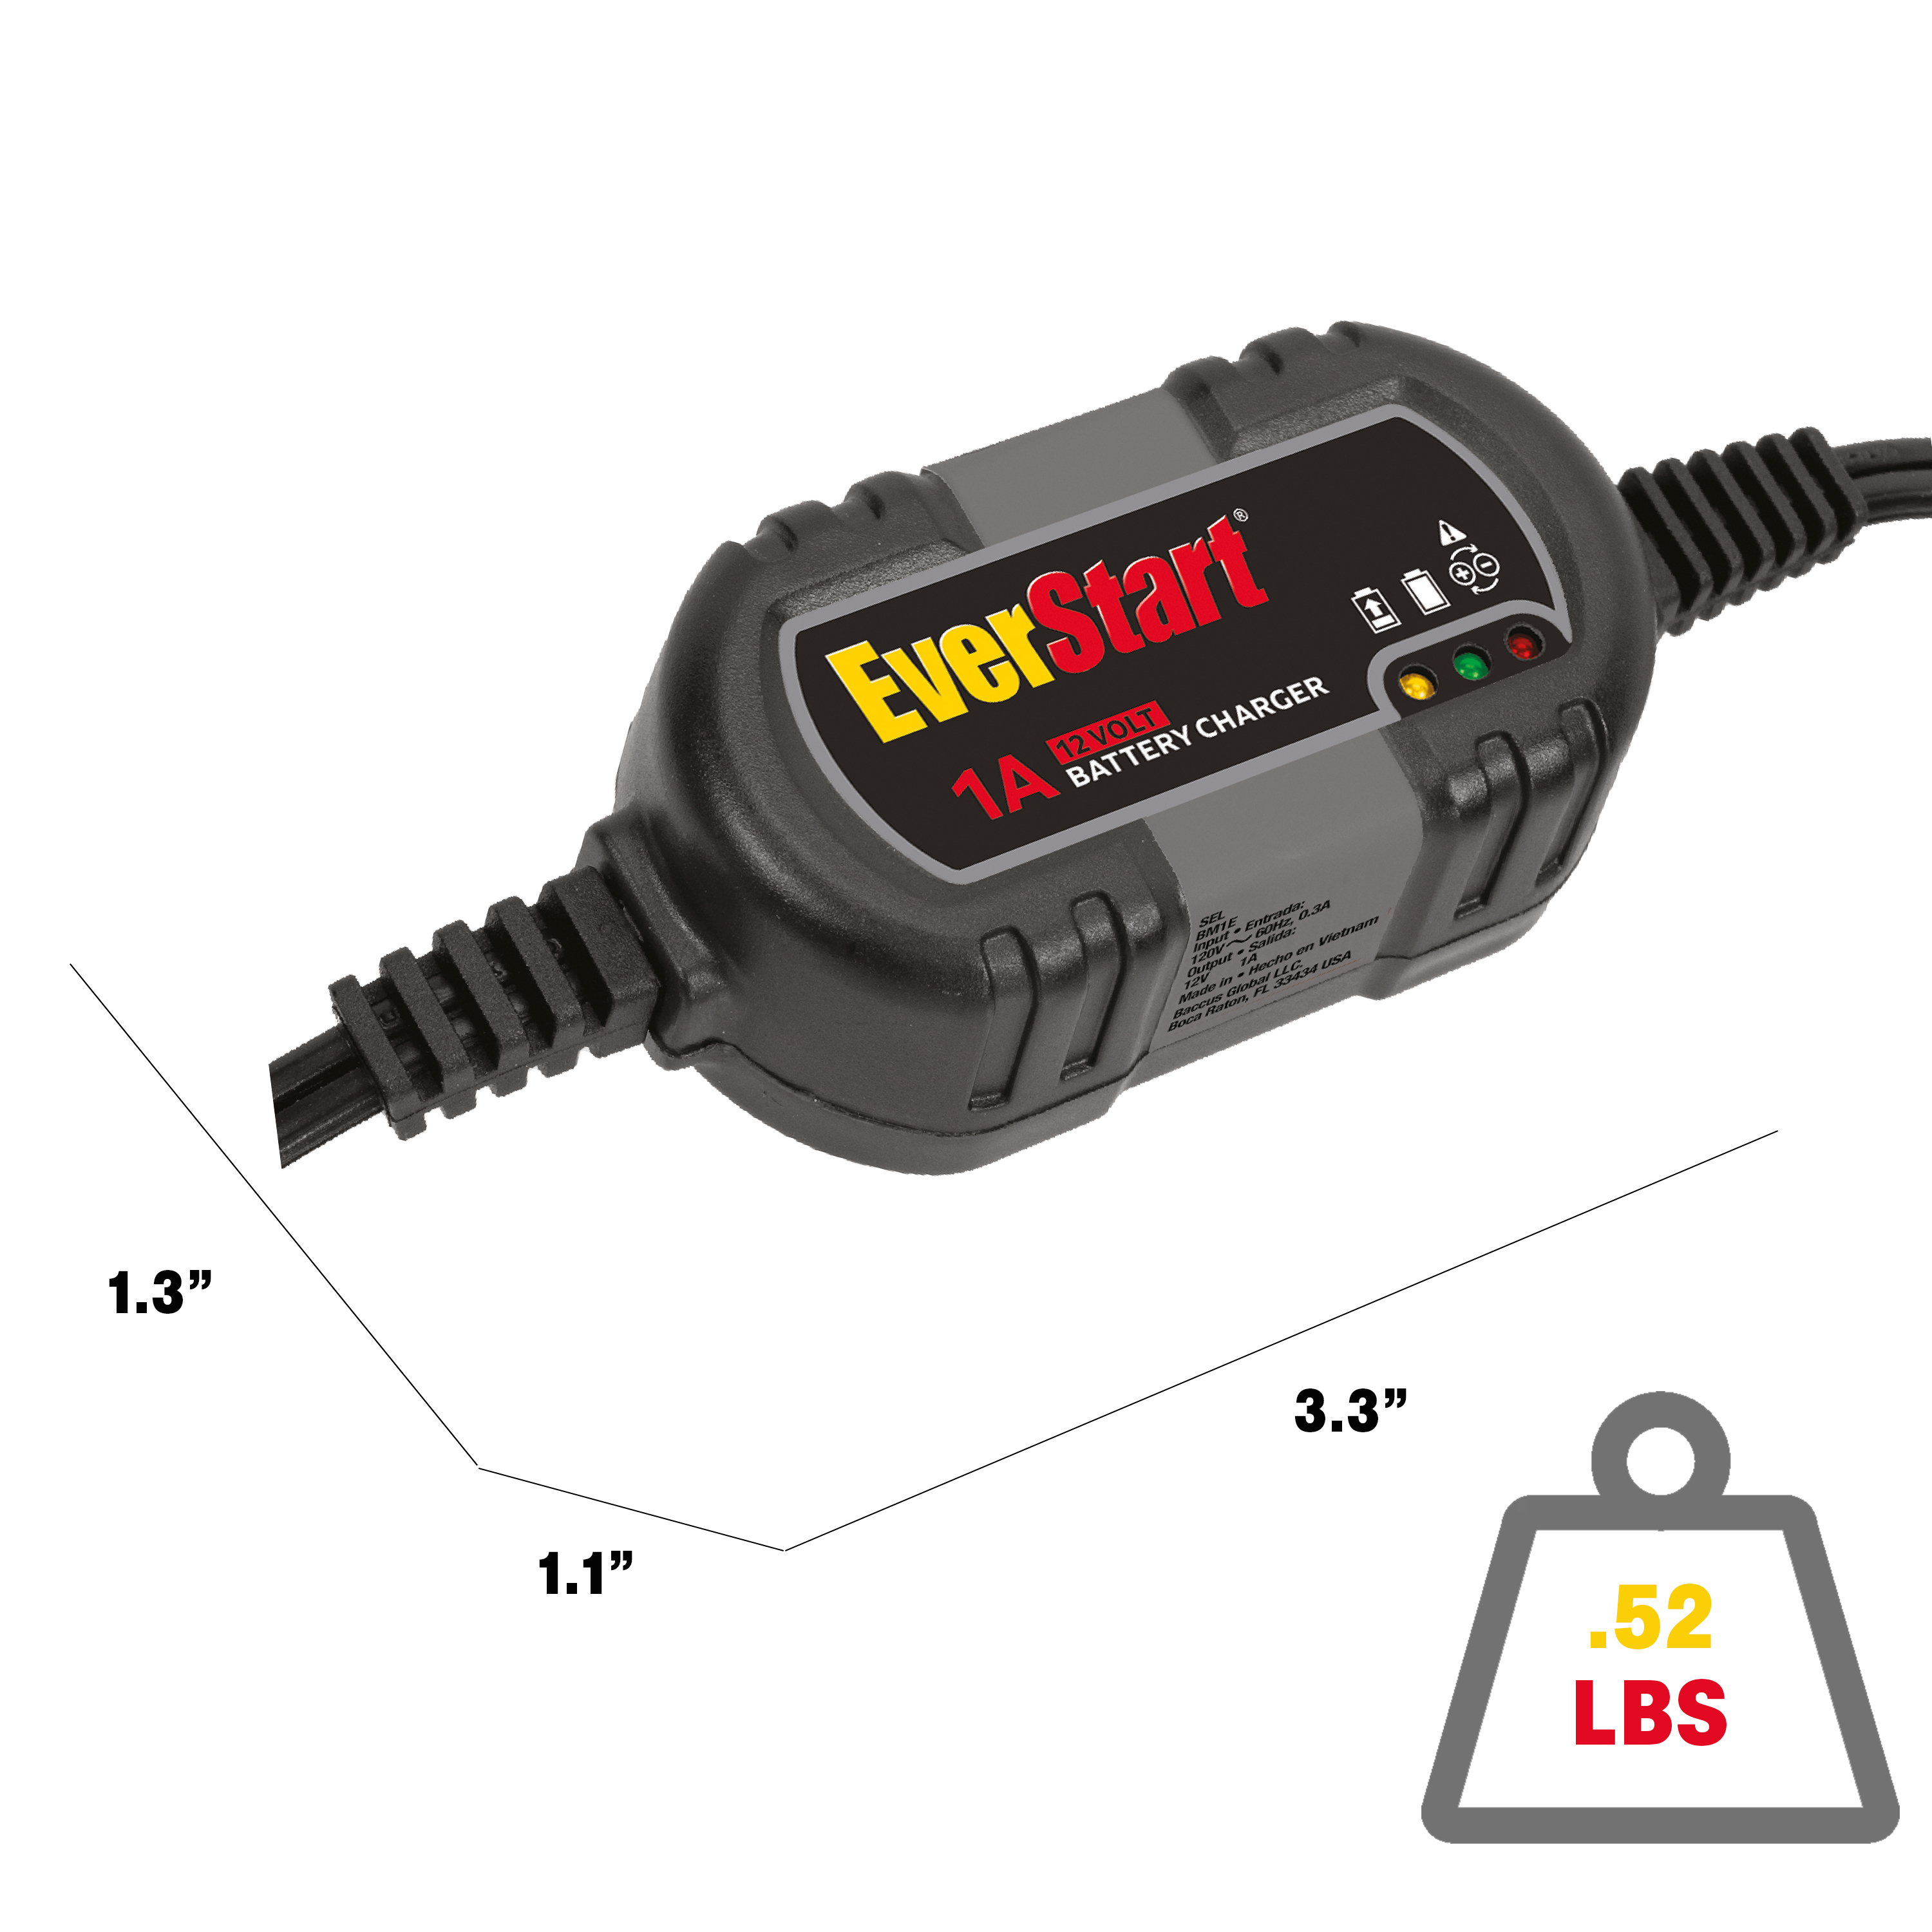 Everstart 12V Automotive/Marine Battery Charger and Maintainer (BM1E) New - image 4 of 7